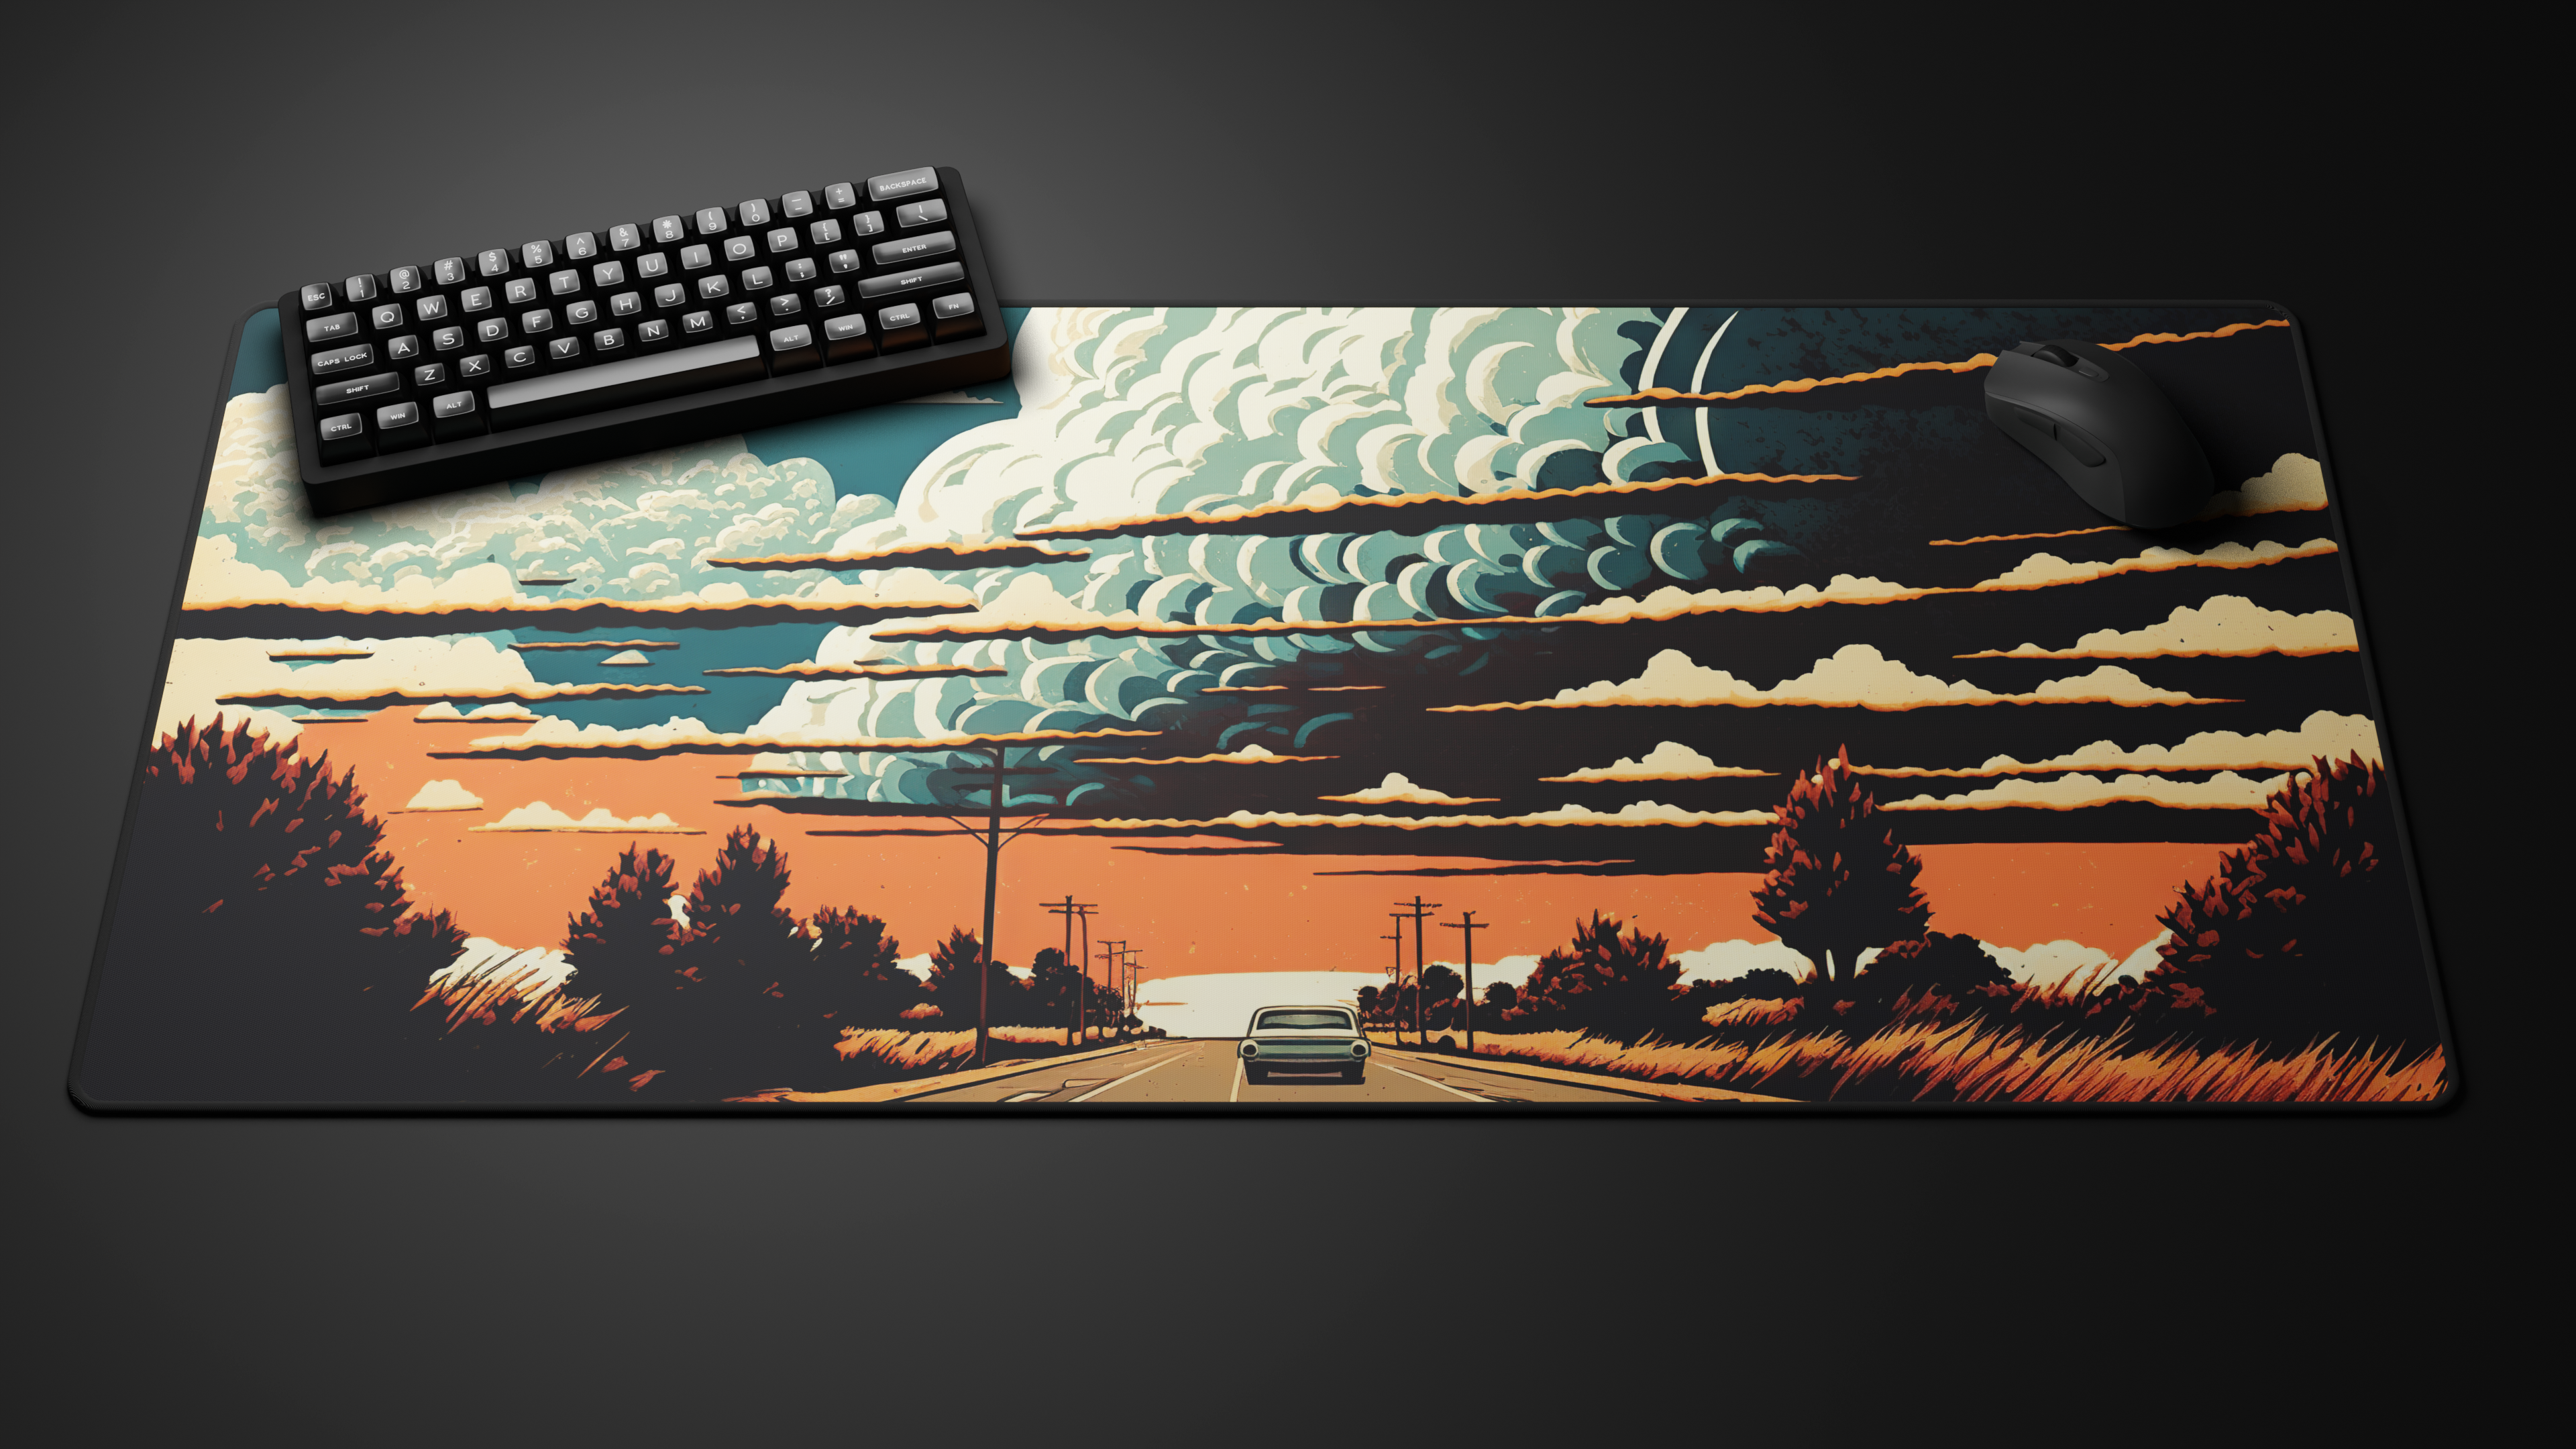 Deskmat 'Winter Collection - Storm is coming' by glutch